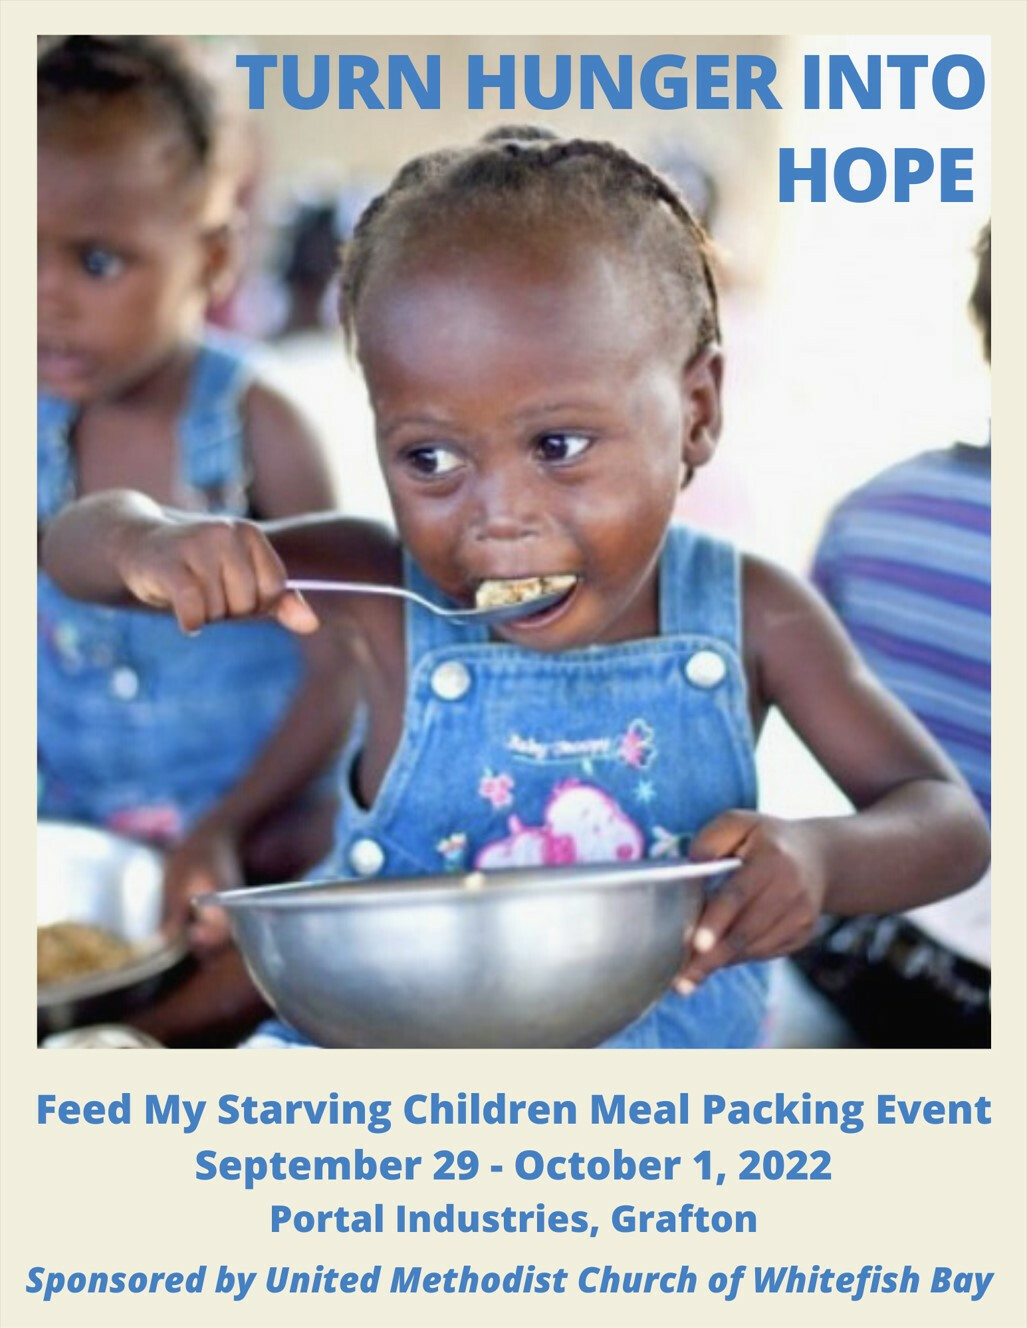 Feed My Starving Children